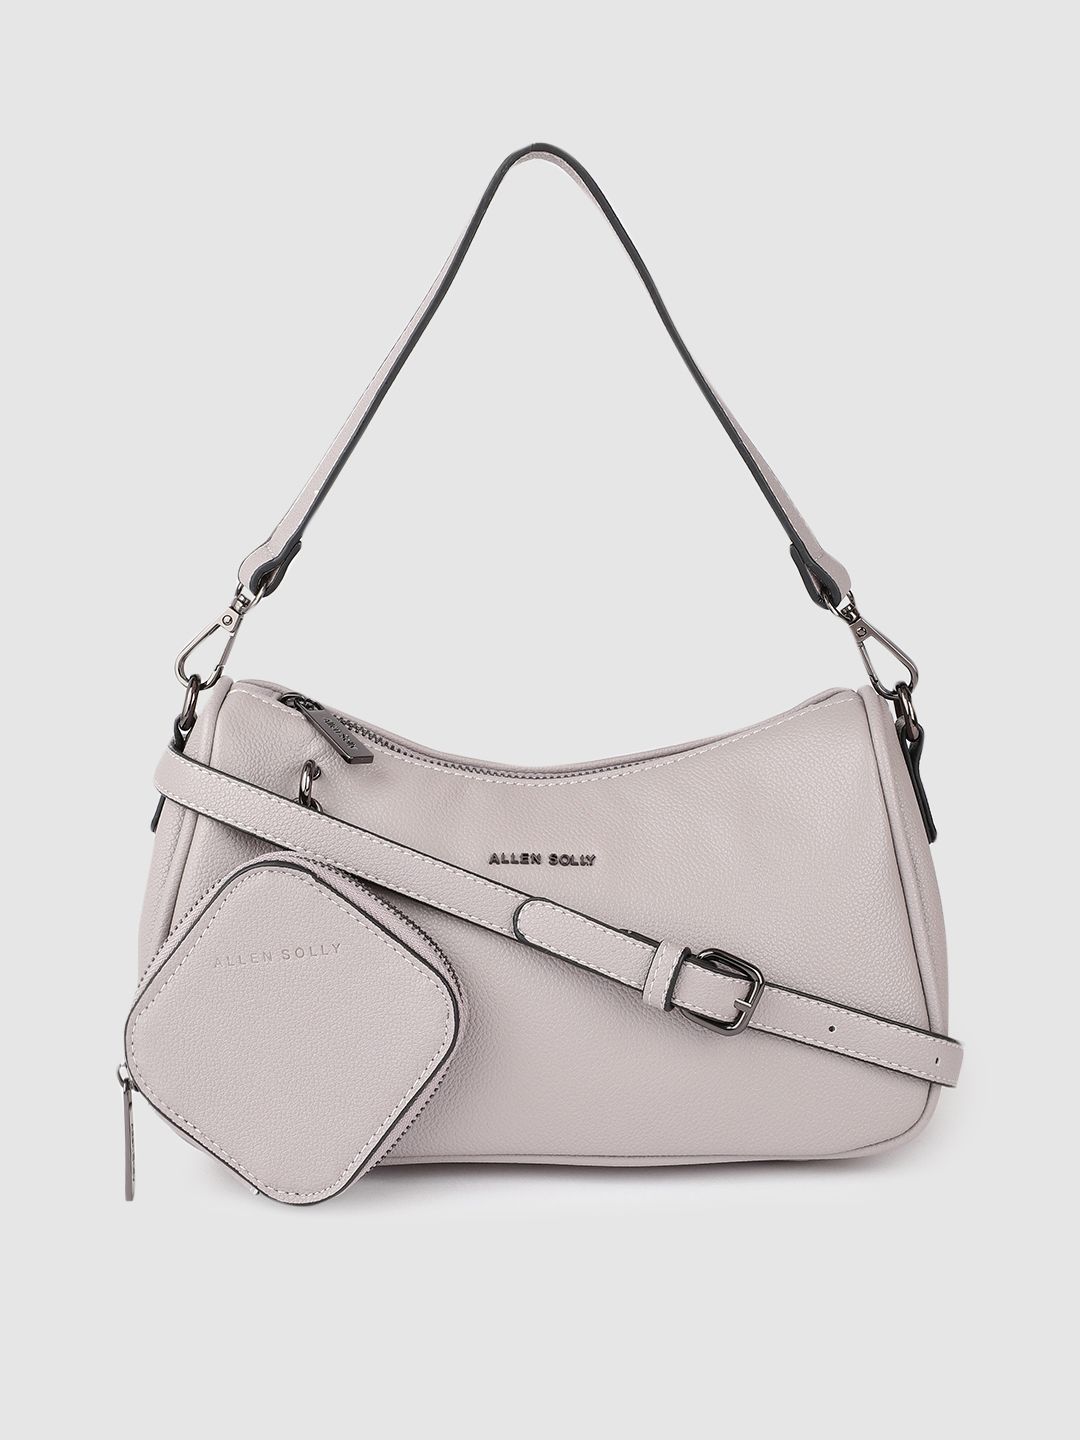 Allen Solly Purple Solid Structured Shoulder Bag Price in India